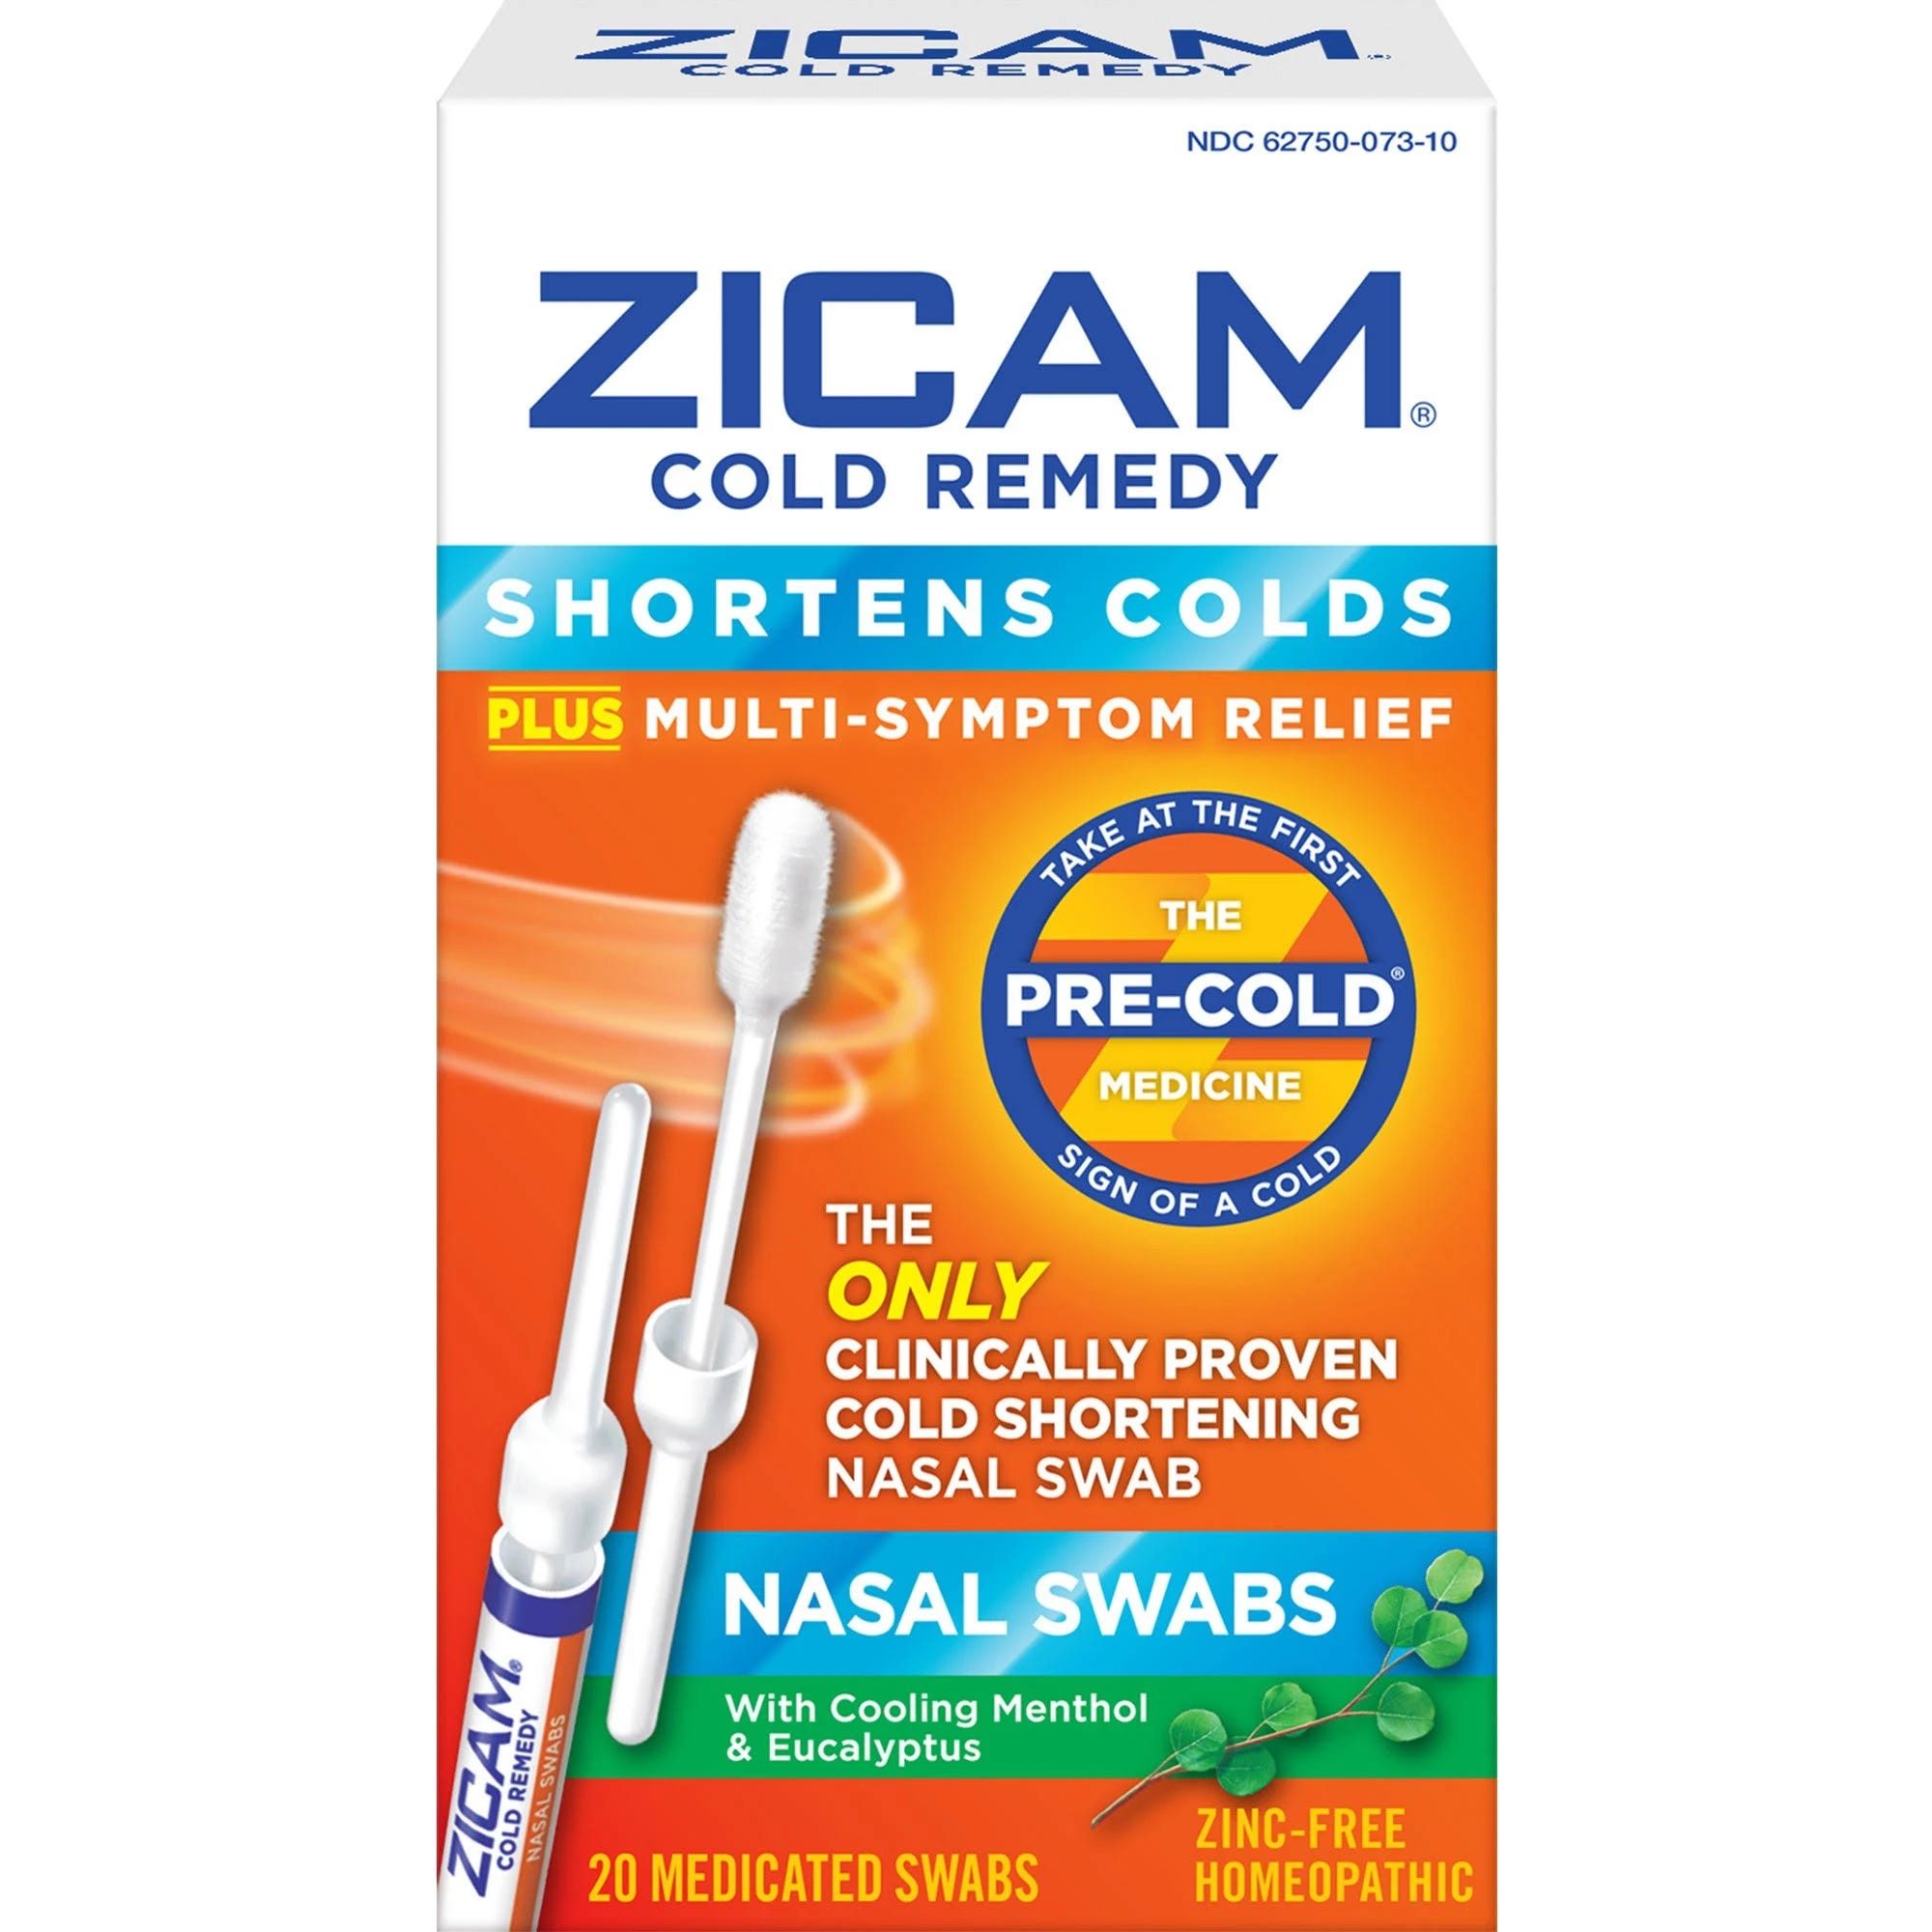 Zicam Cold Remedy Nasal Swabs for Relief | Image